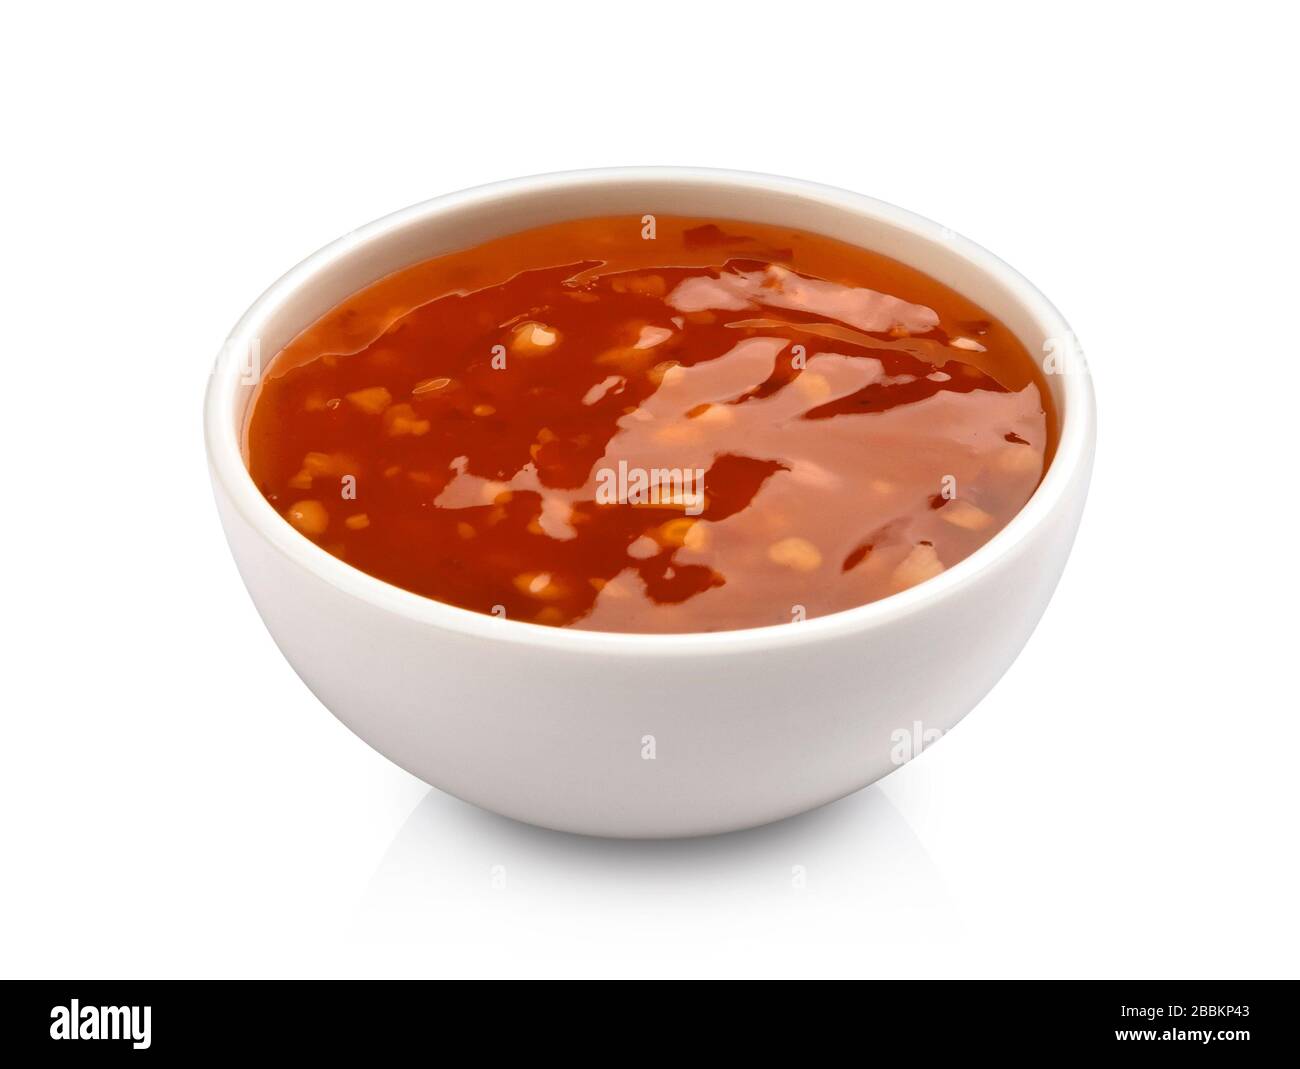 Sweet and sour sauce isolated on white background Stock Photo